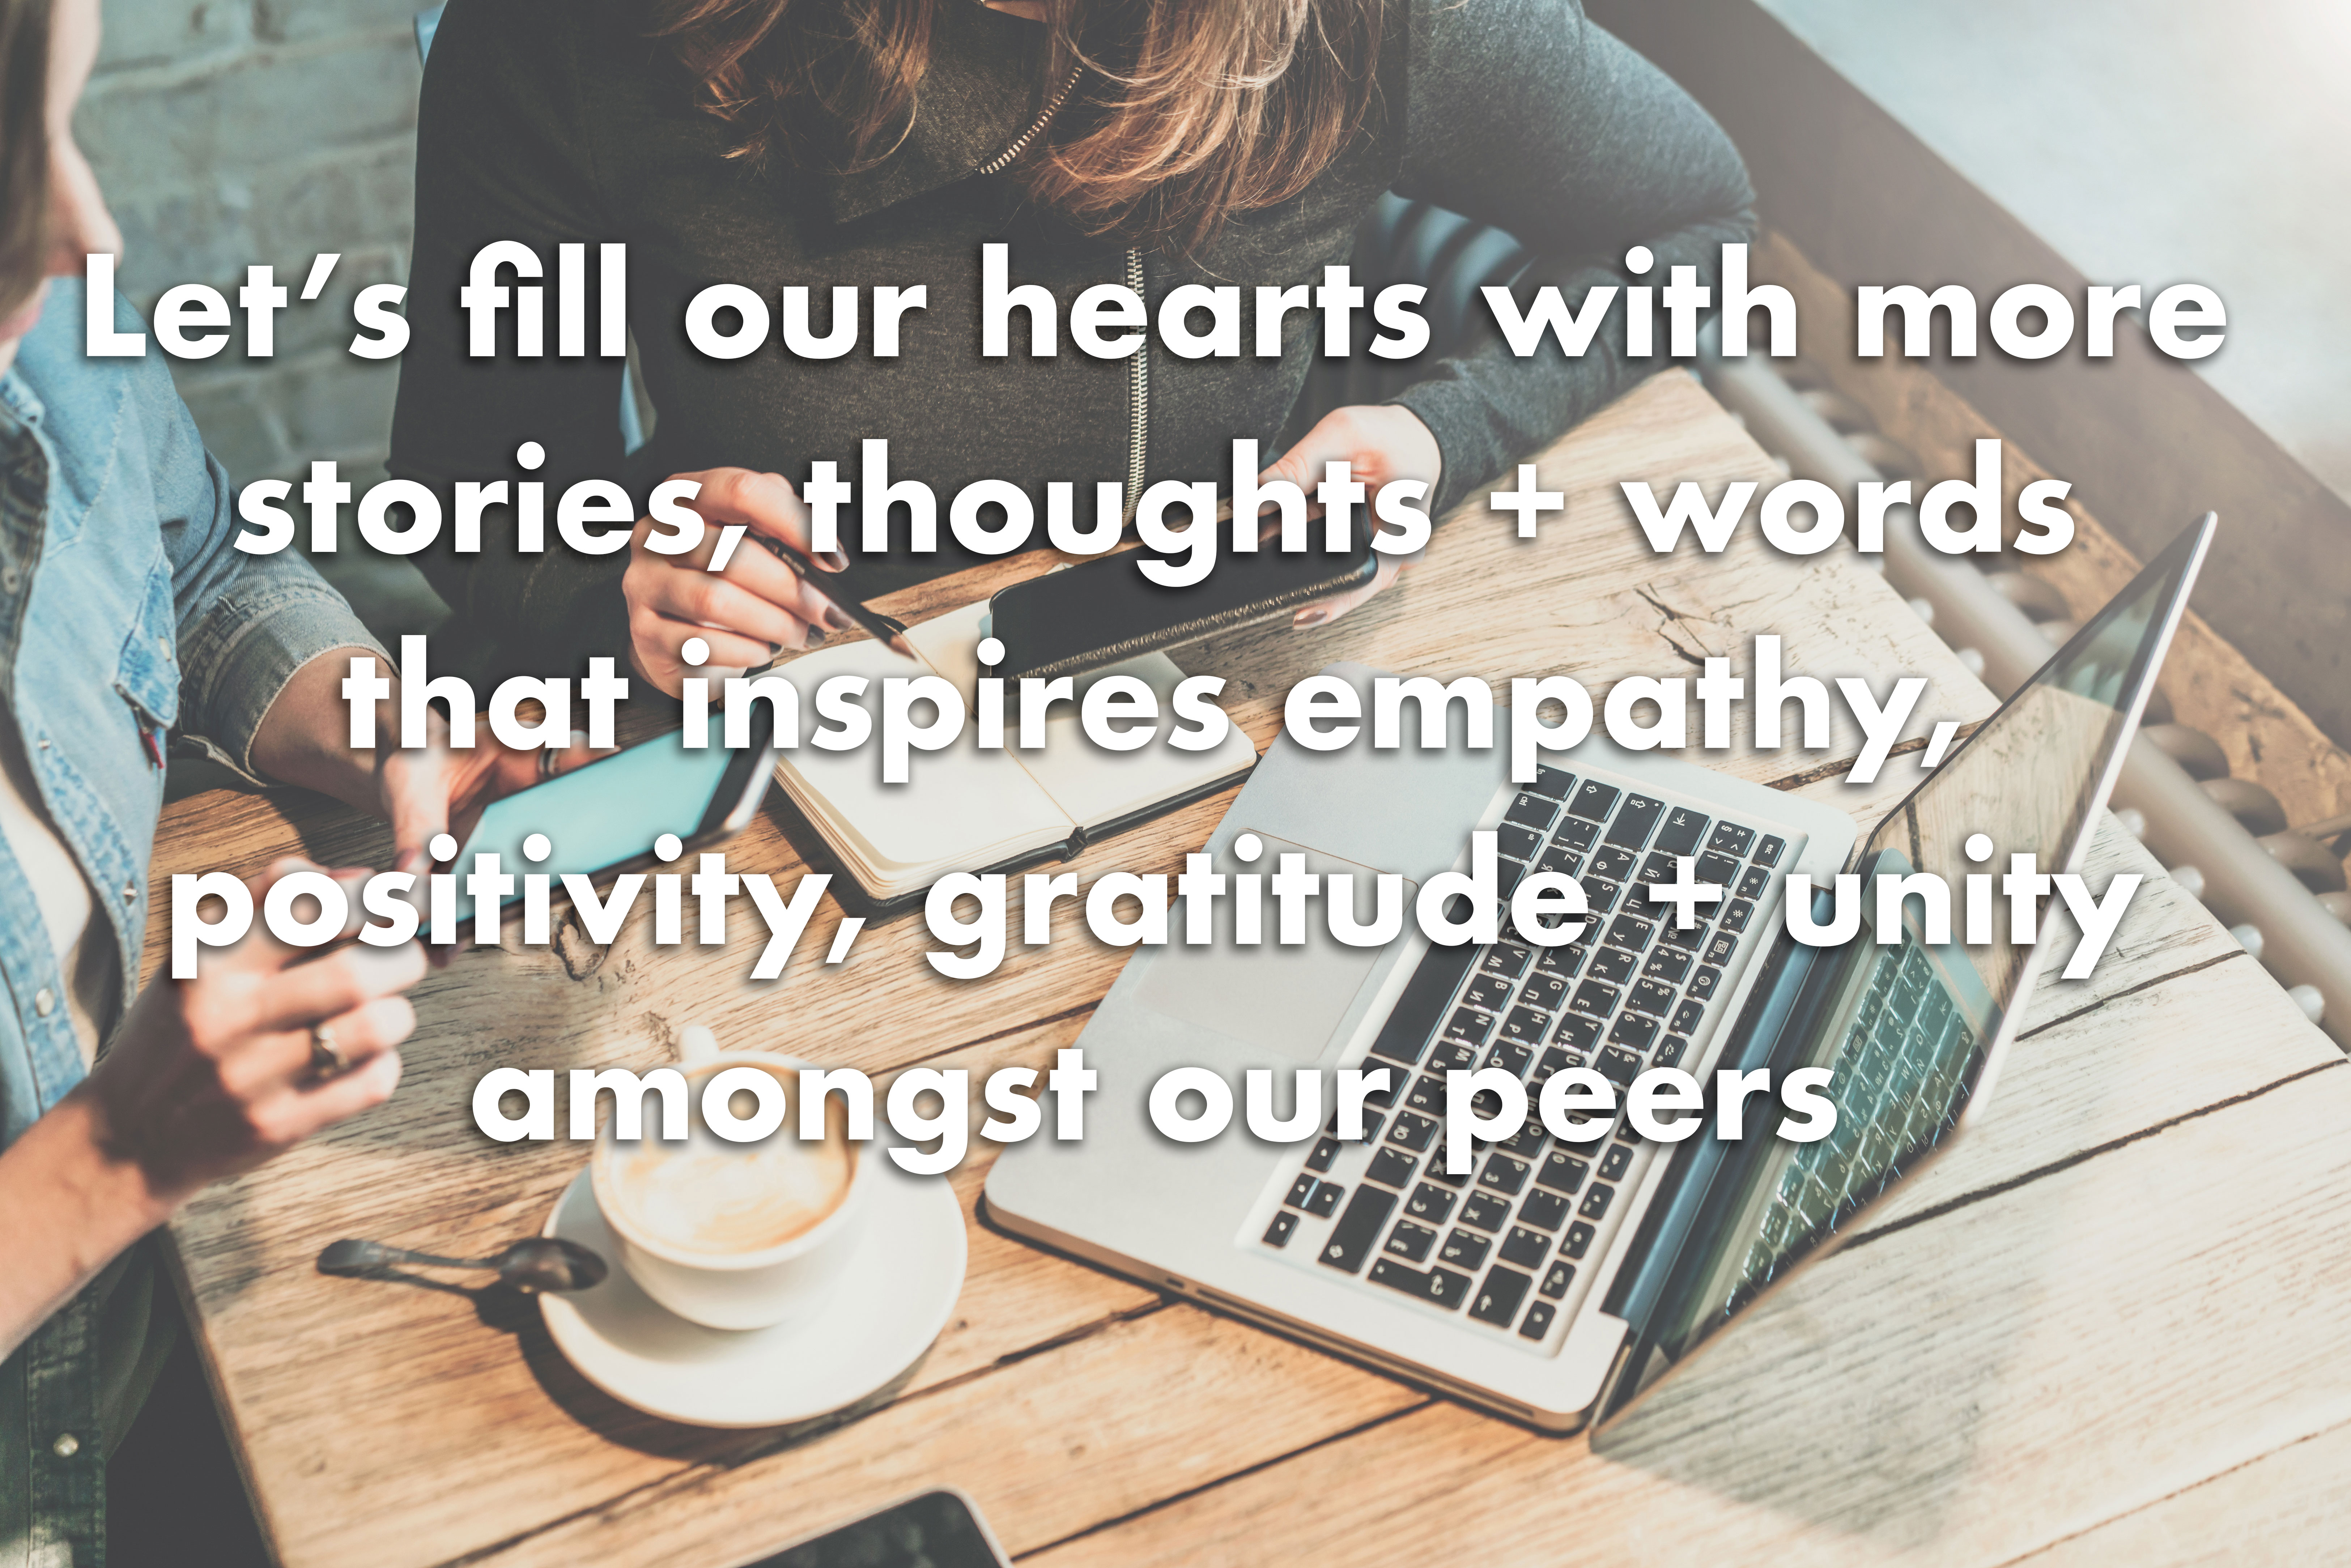 Let's fill our hearts with more stories, thoughts and words to inspire empathy, positivity, gratitude and unity amongst our peers